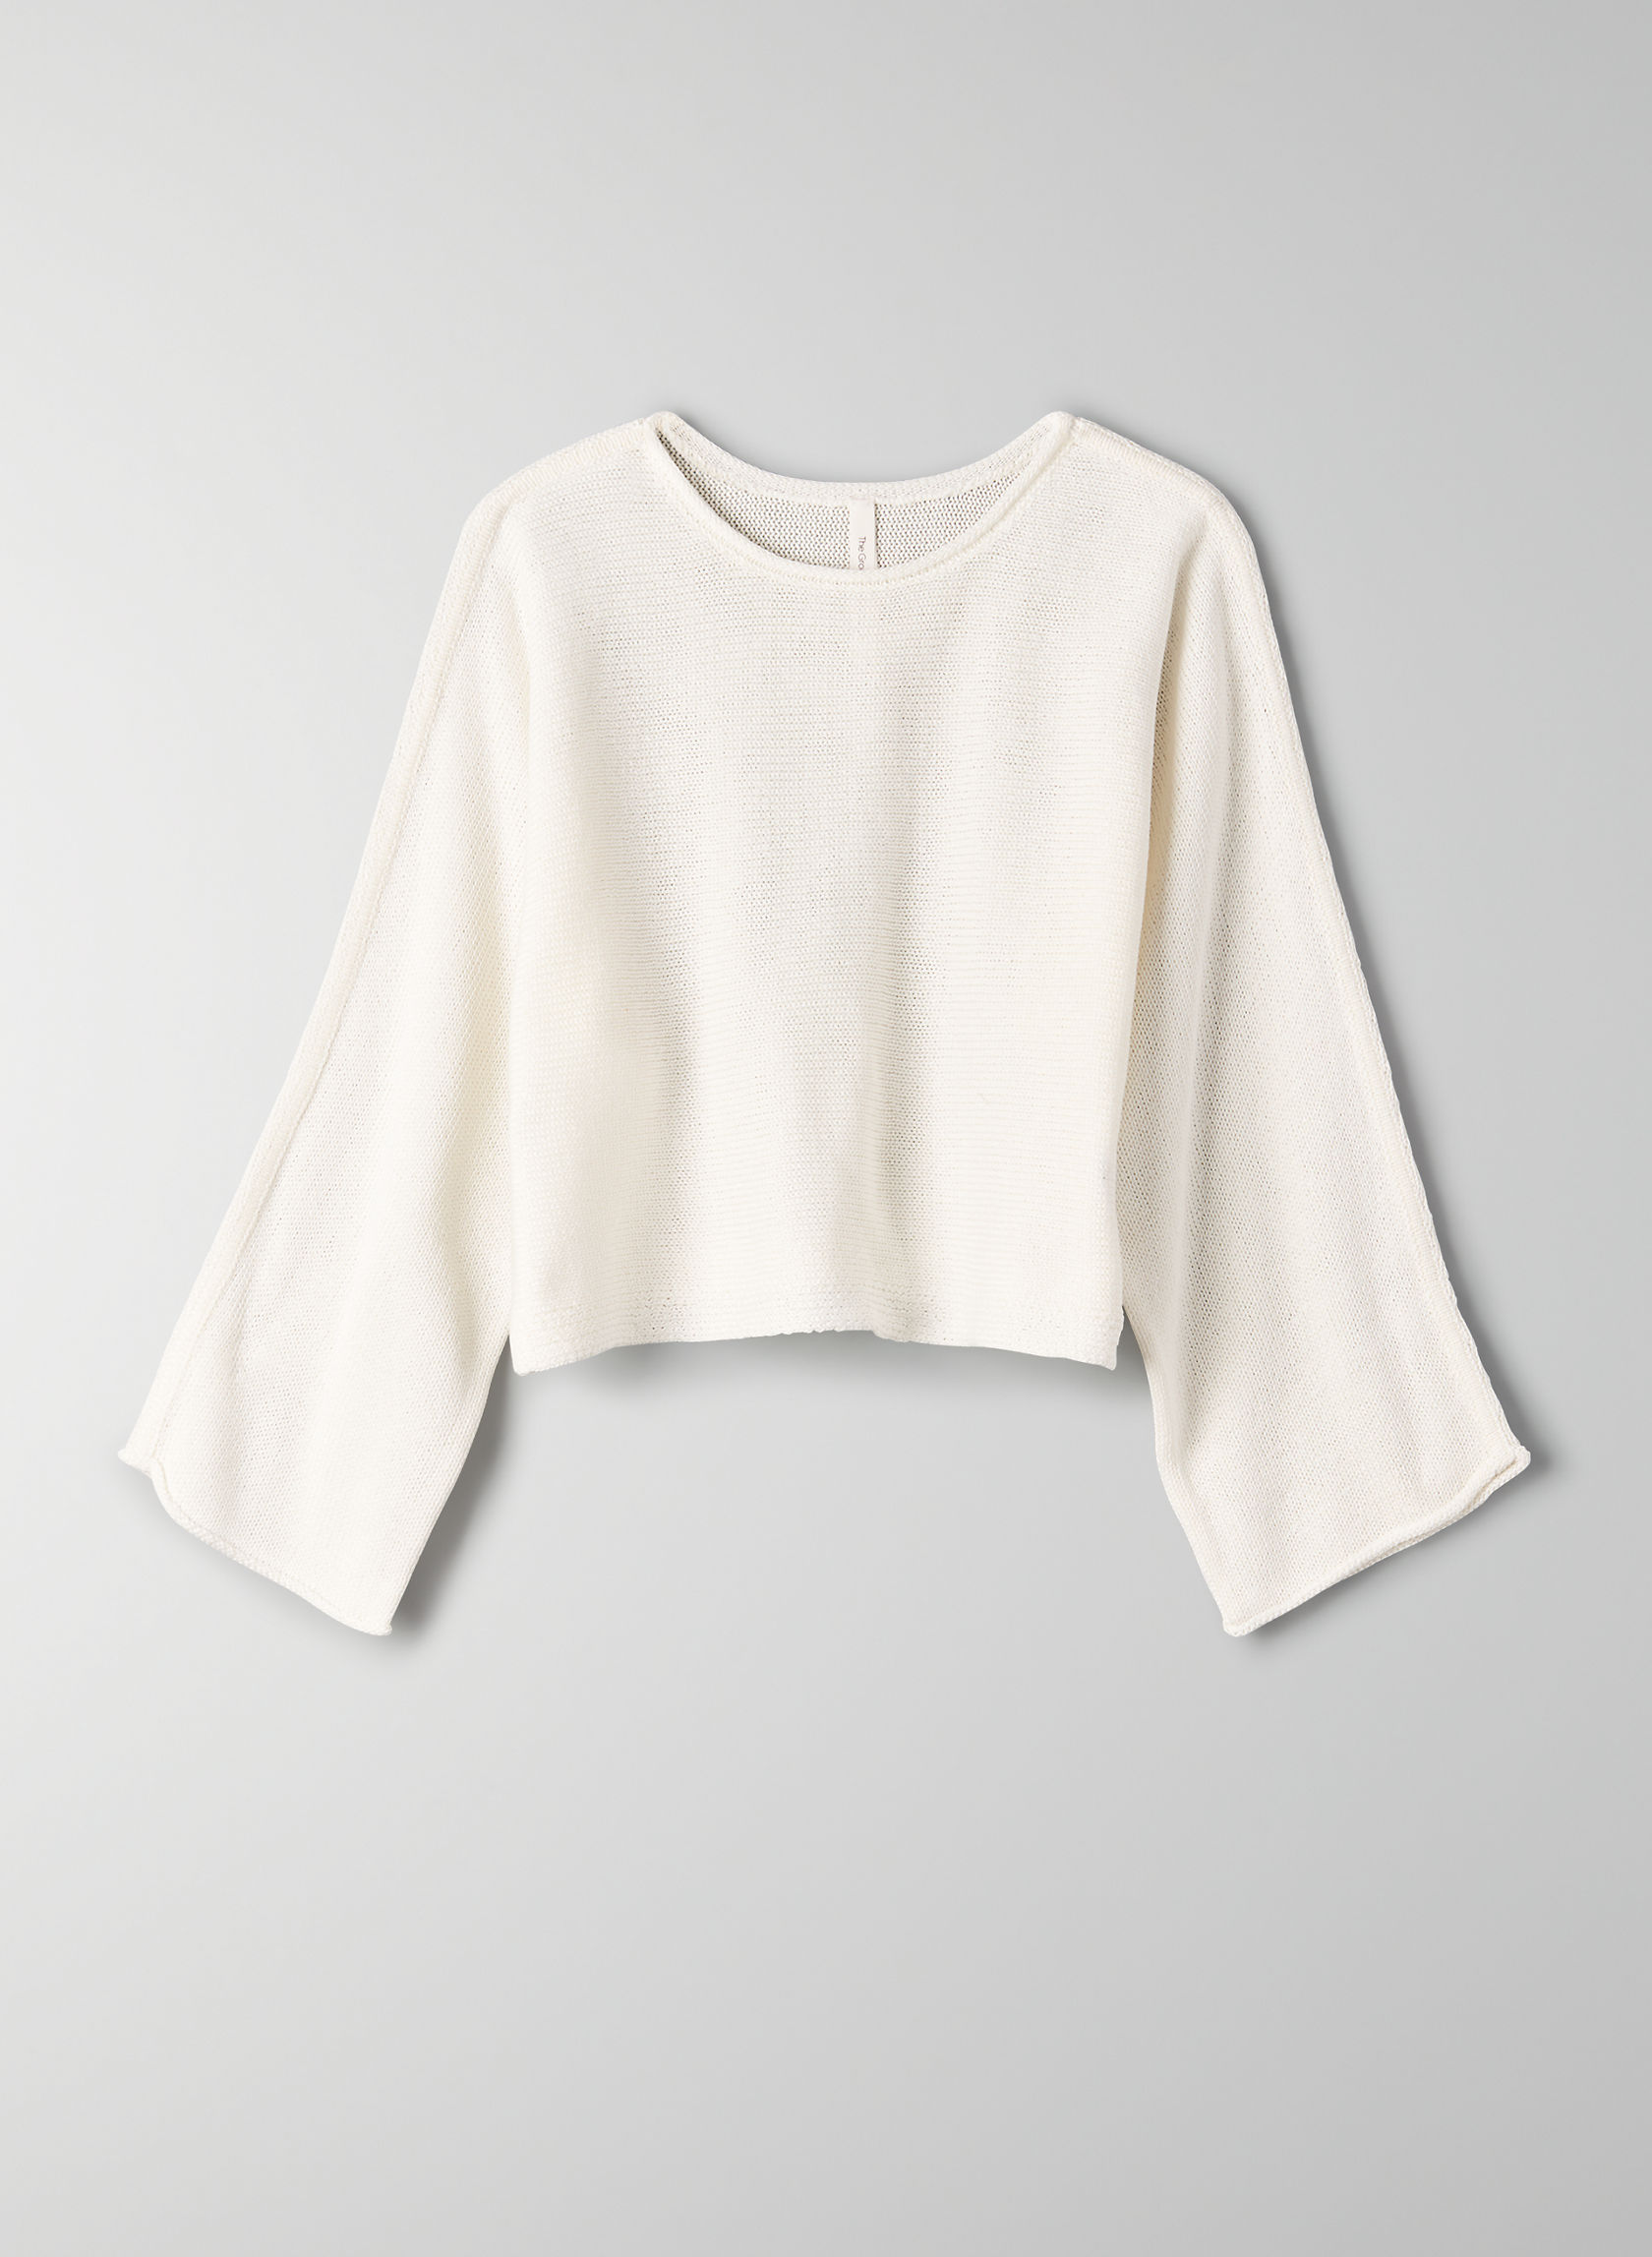 The Group by Babaton MARIANNA SWEATER | Aritzia INTL